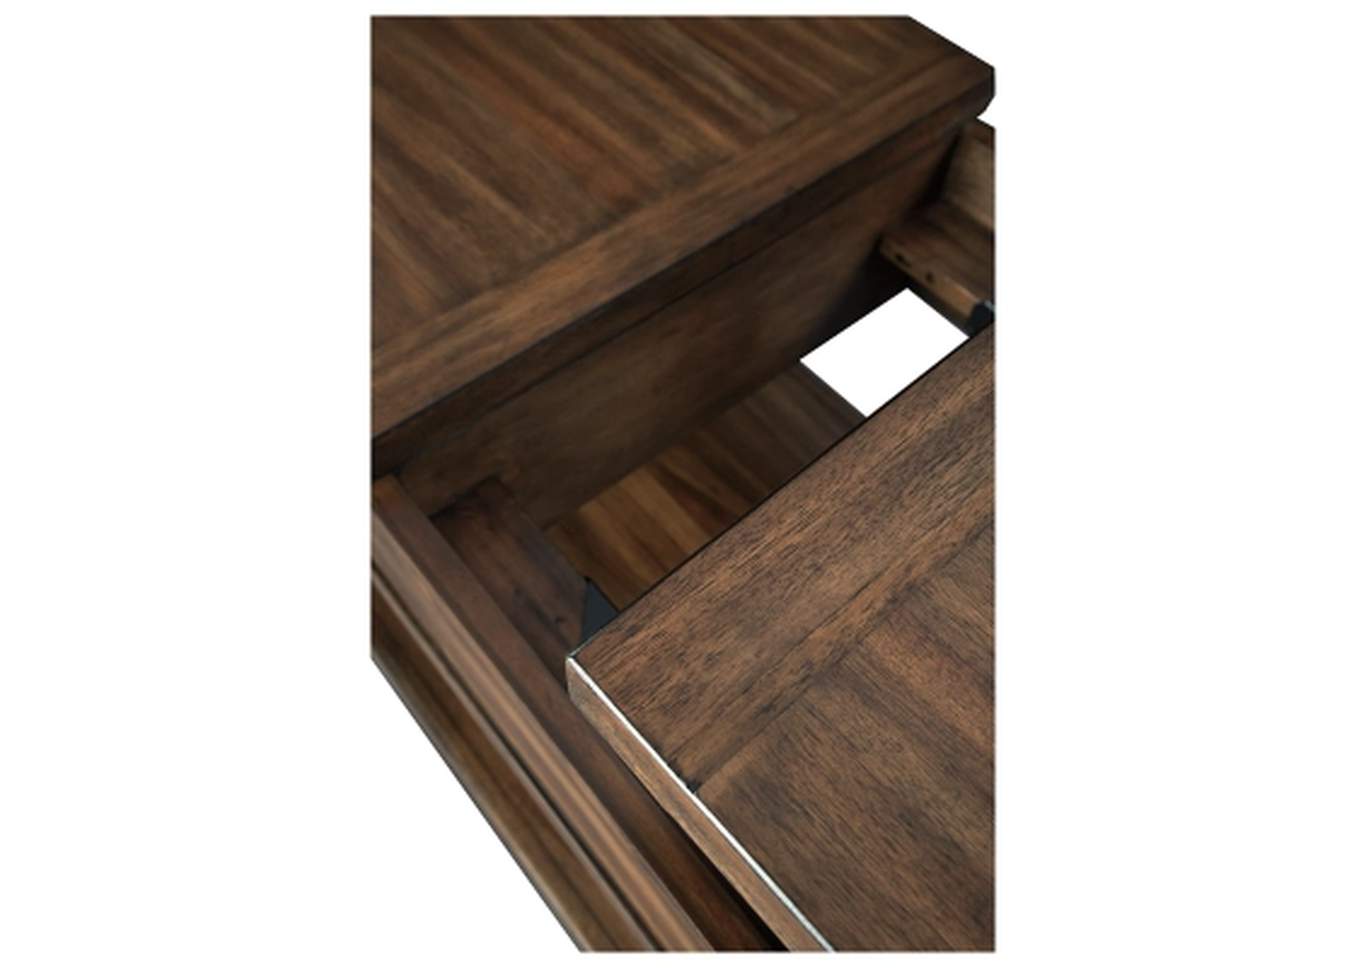 Marleza Brown Coffee Table w/Lift Top,In Store